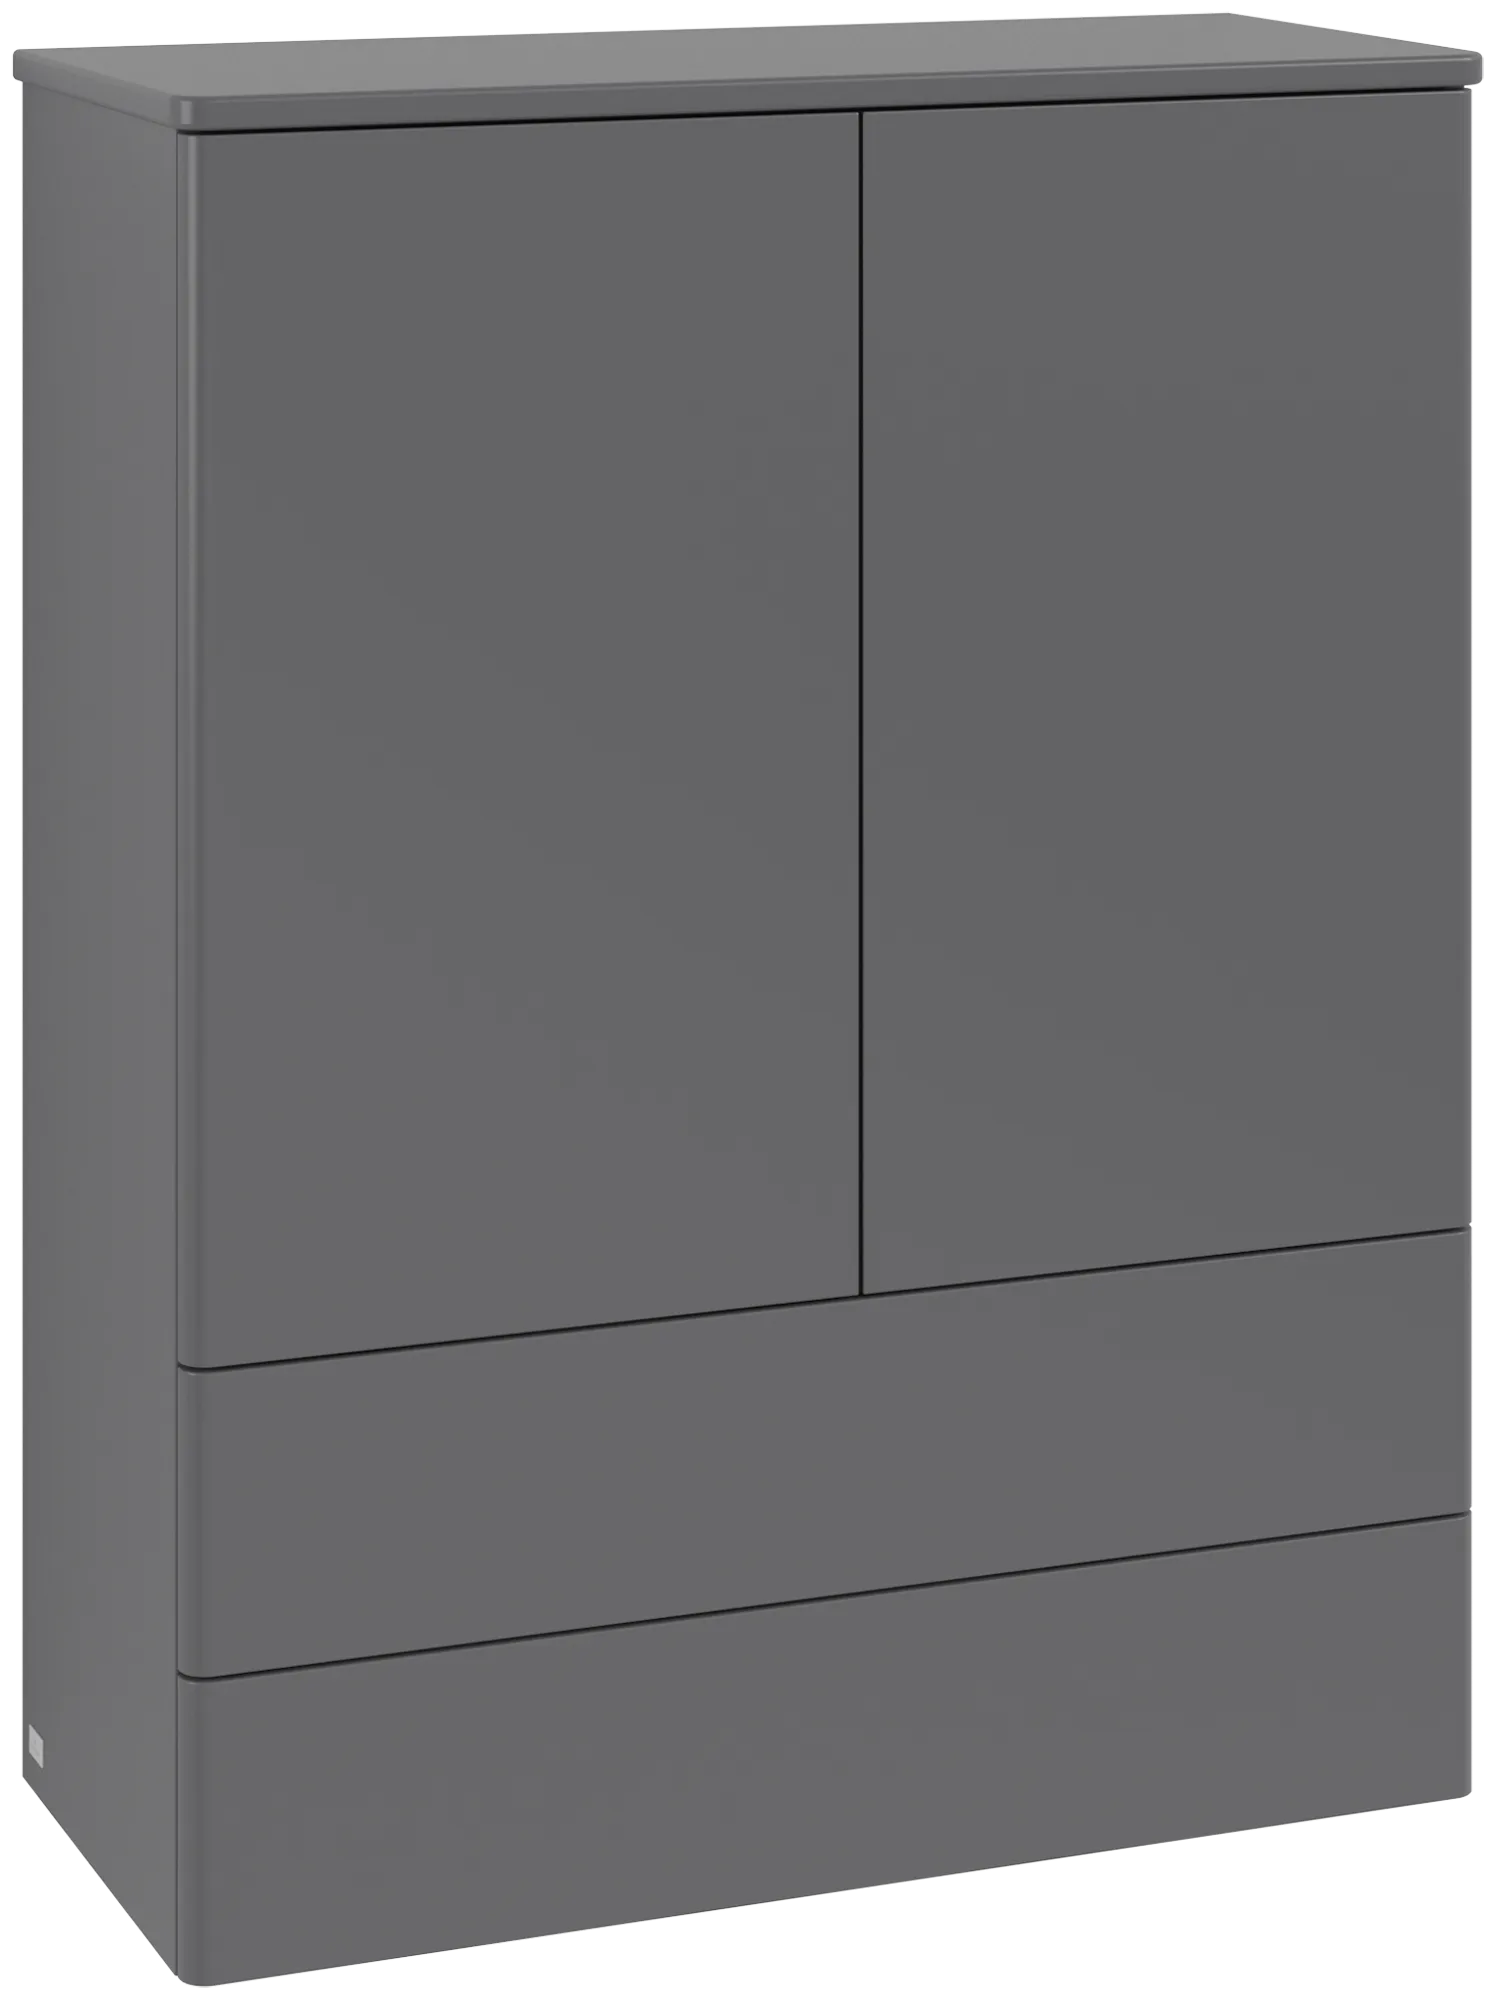 VILLEROY BOCH Antao Highboard, with lighting, 2 doors, 814 x 1039 x 356 mm, Front without structure, Anthracite Matt Lacquer / Anthracite Matt Lacquer #L47000GK resmi